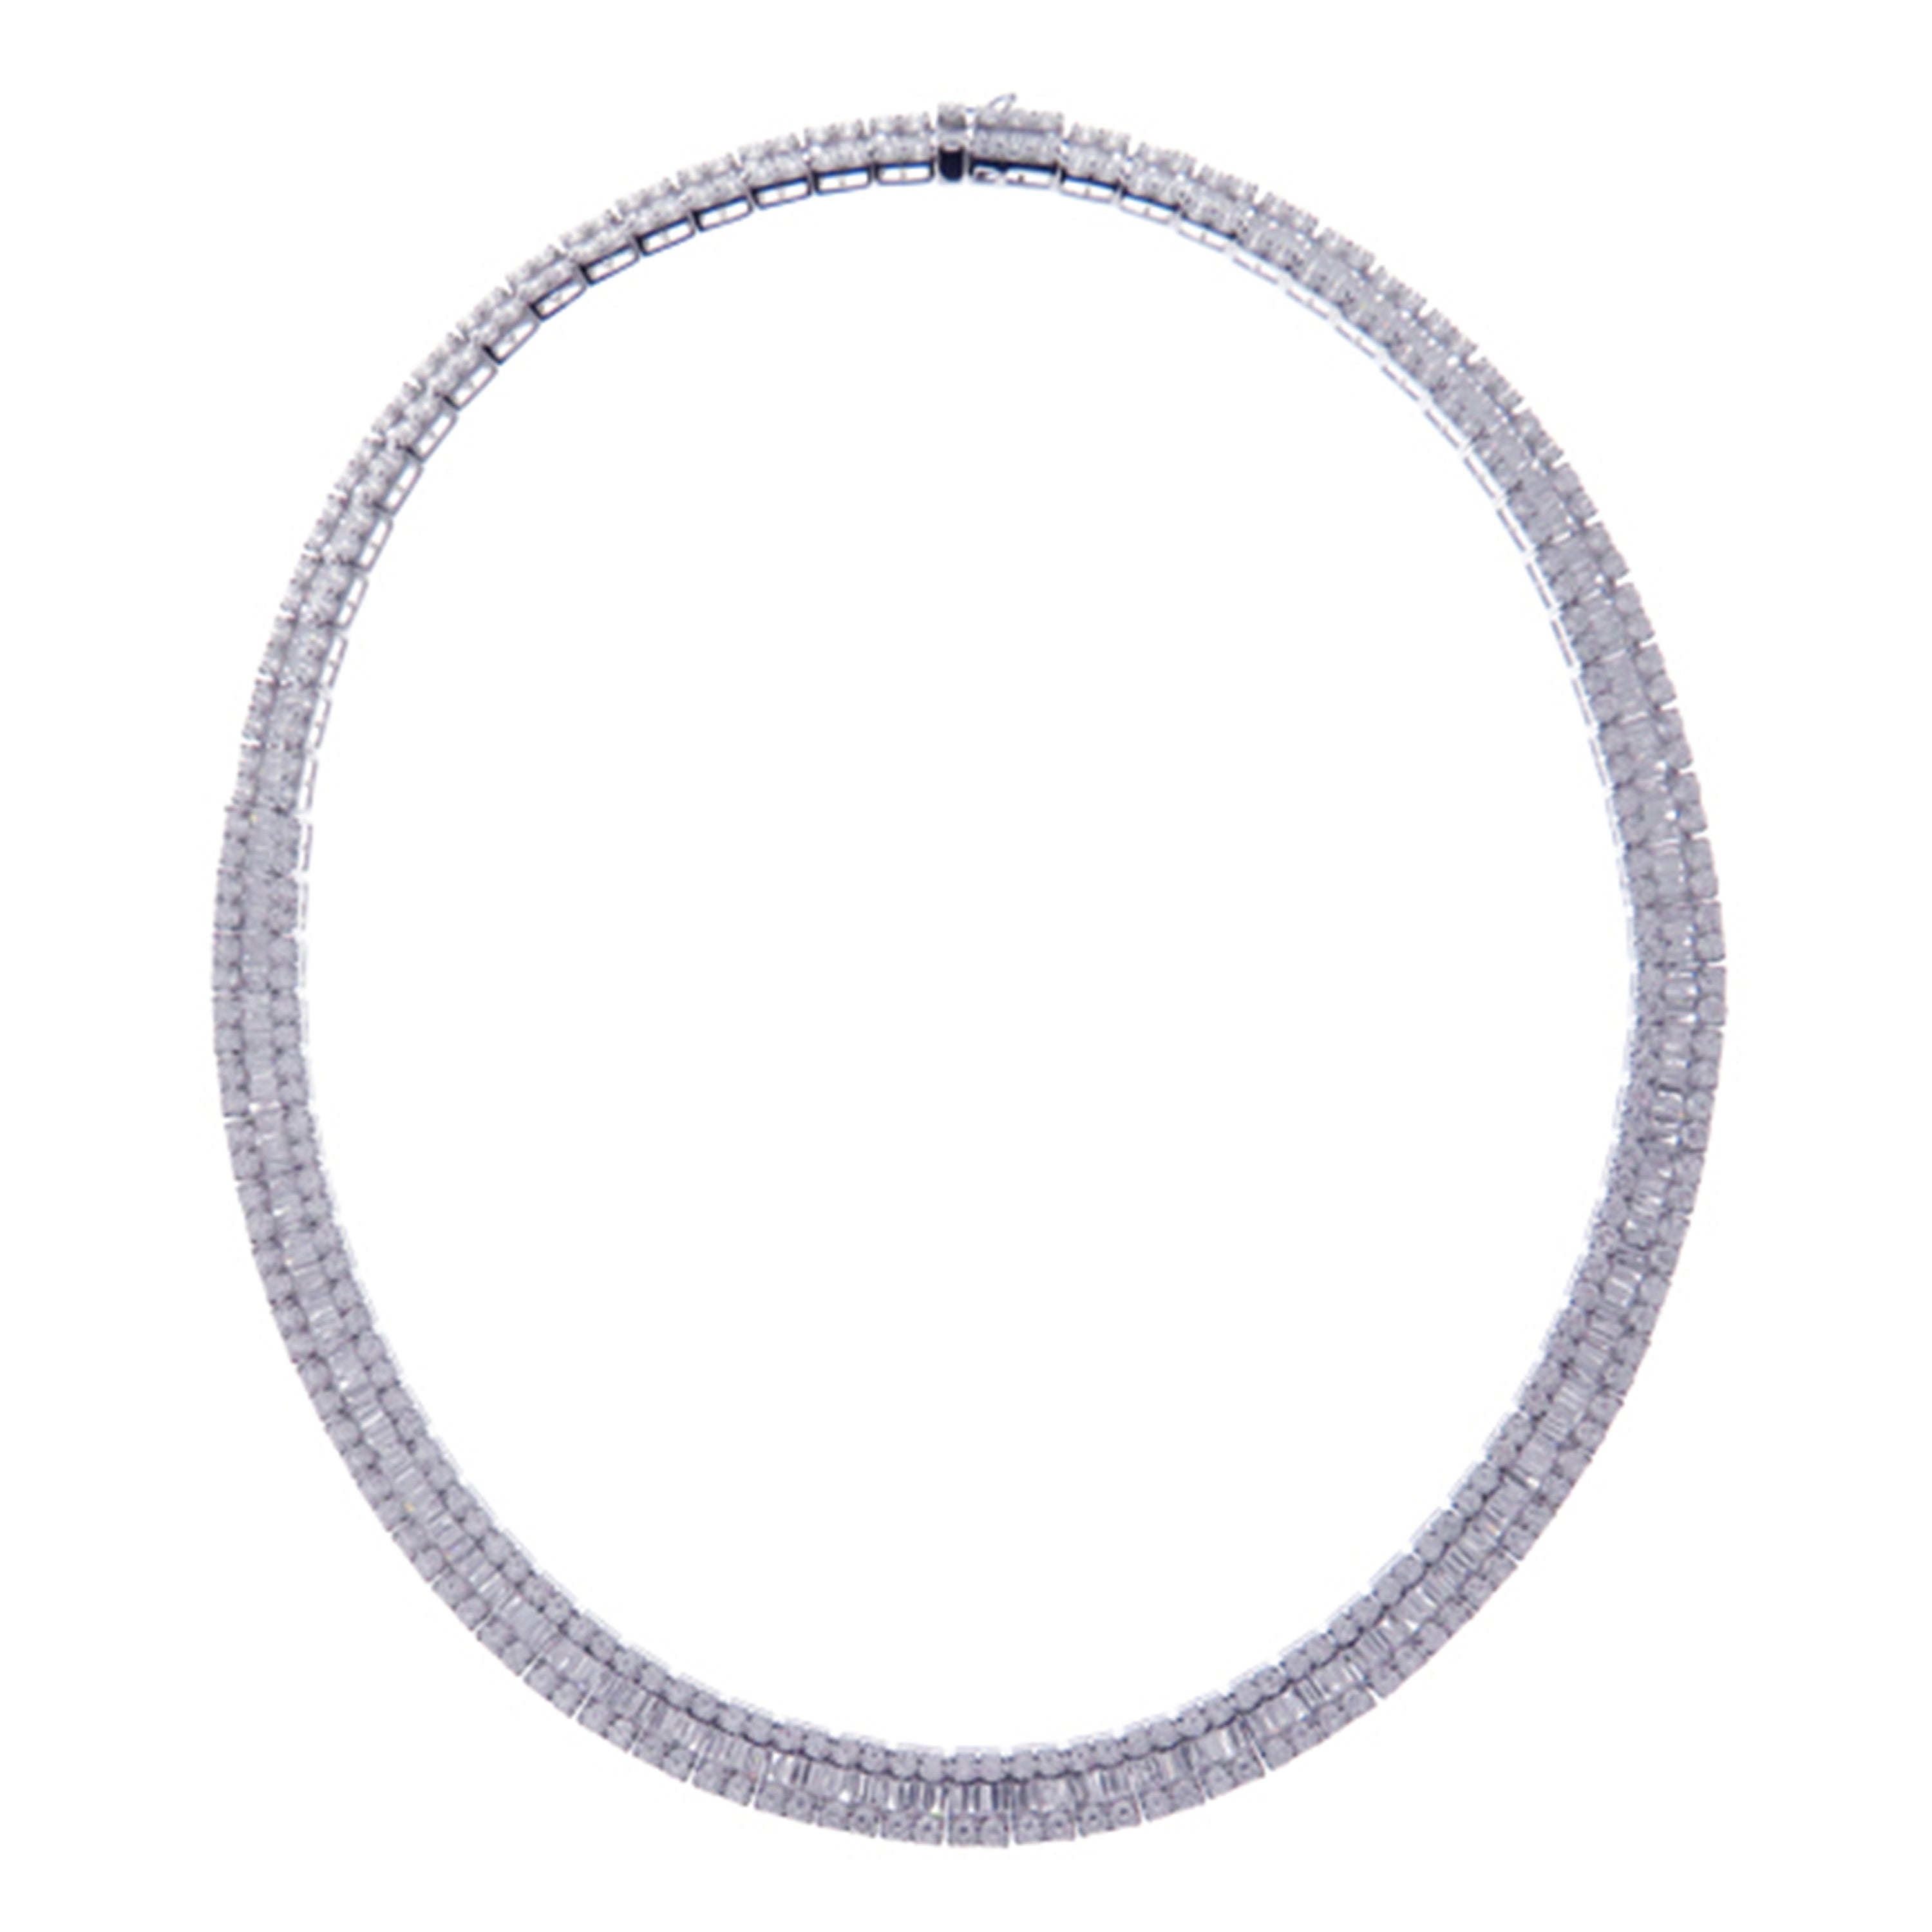 Necklace Information
Metal Purity : 18K
Gold Weight : 46.04g
Length : 17''
Diamond Count : 308 Round Diamonds
Round Diamond Carat Weight : 20.52 ttcw
Baguette Diamonds Count : 307
Baguette Diamonds Carat Weight : 11.85 ttcw
Serial #NE13250
